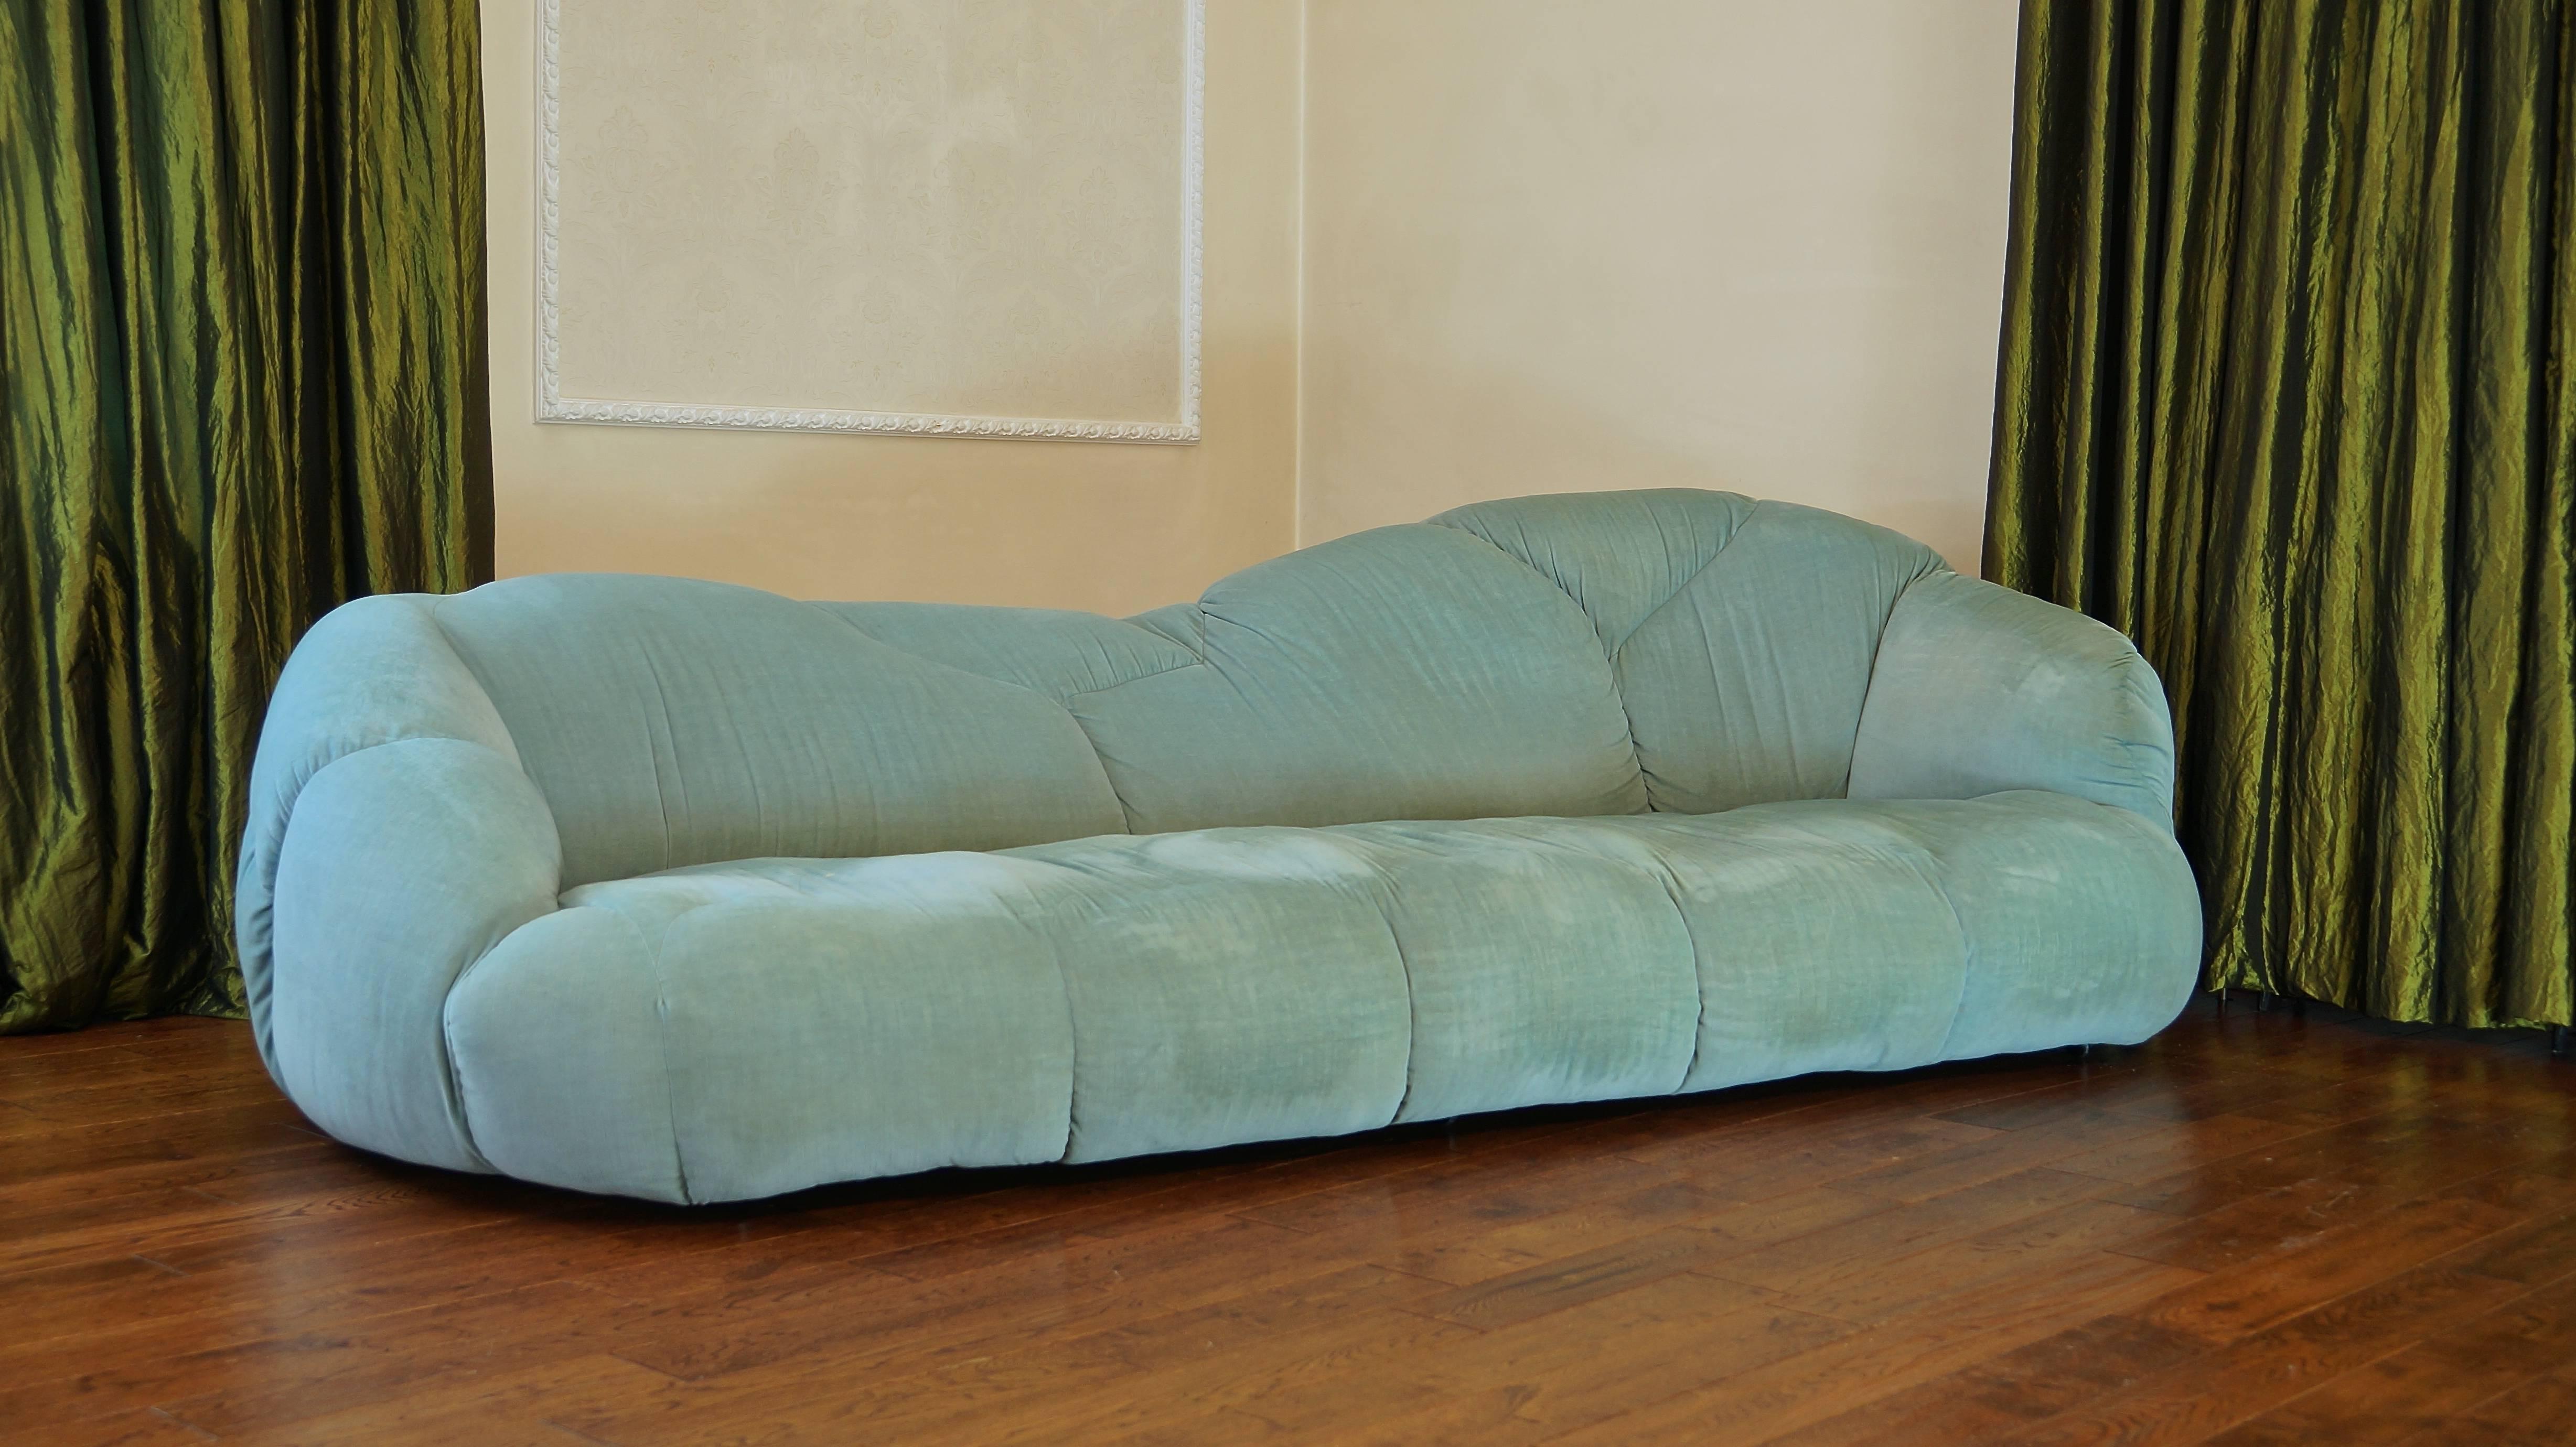 Late 20th Century Vintage HK Cloud Sofa Suite, Howard Keith, 1970s, Chaise Longue, Couch, Armchair For Sale